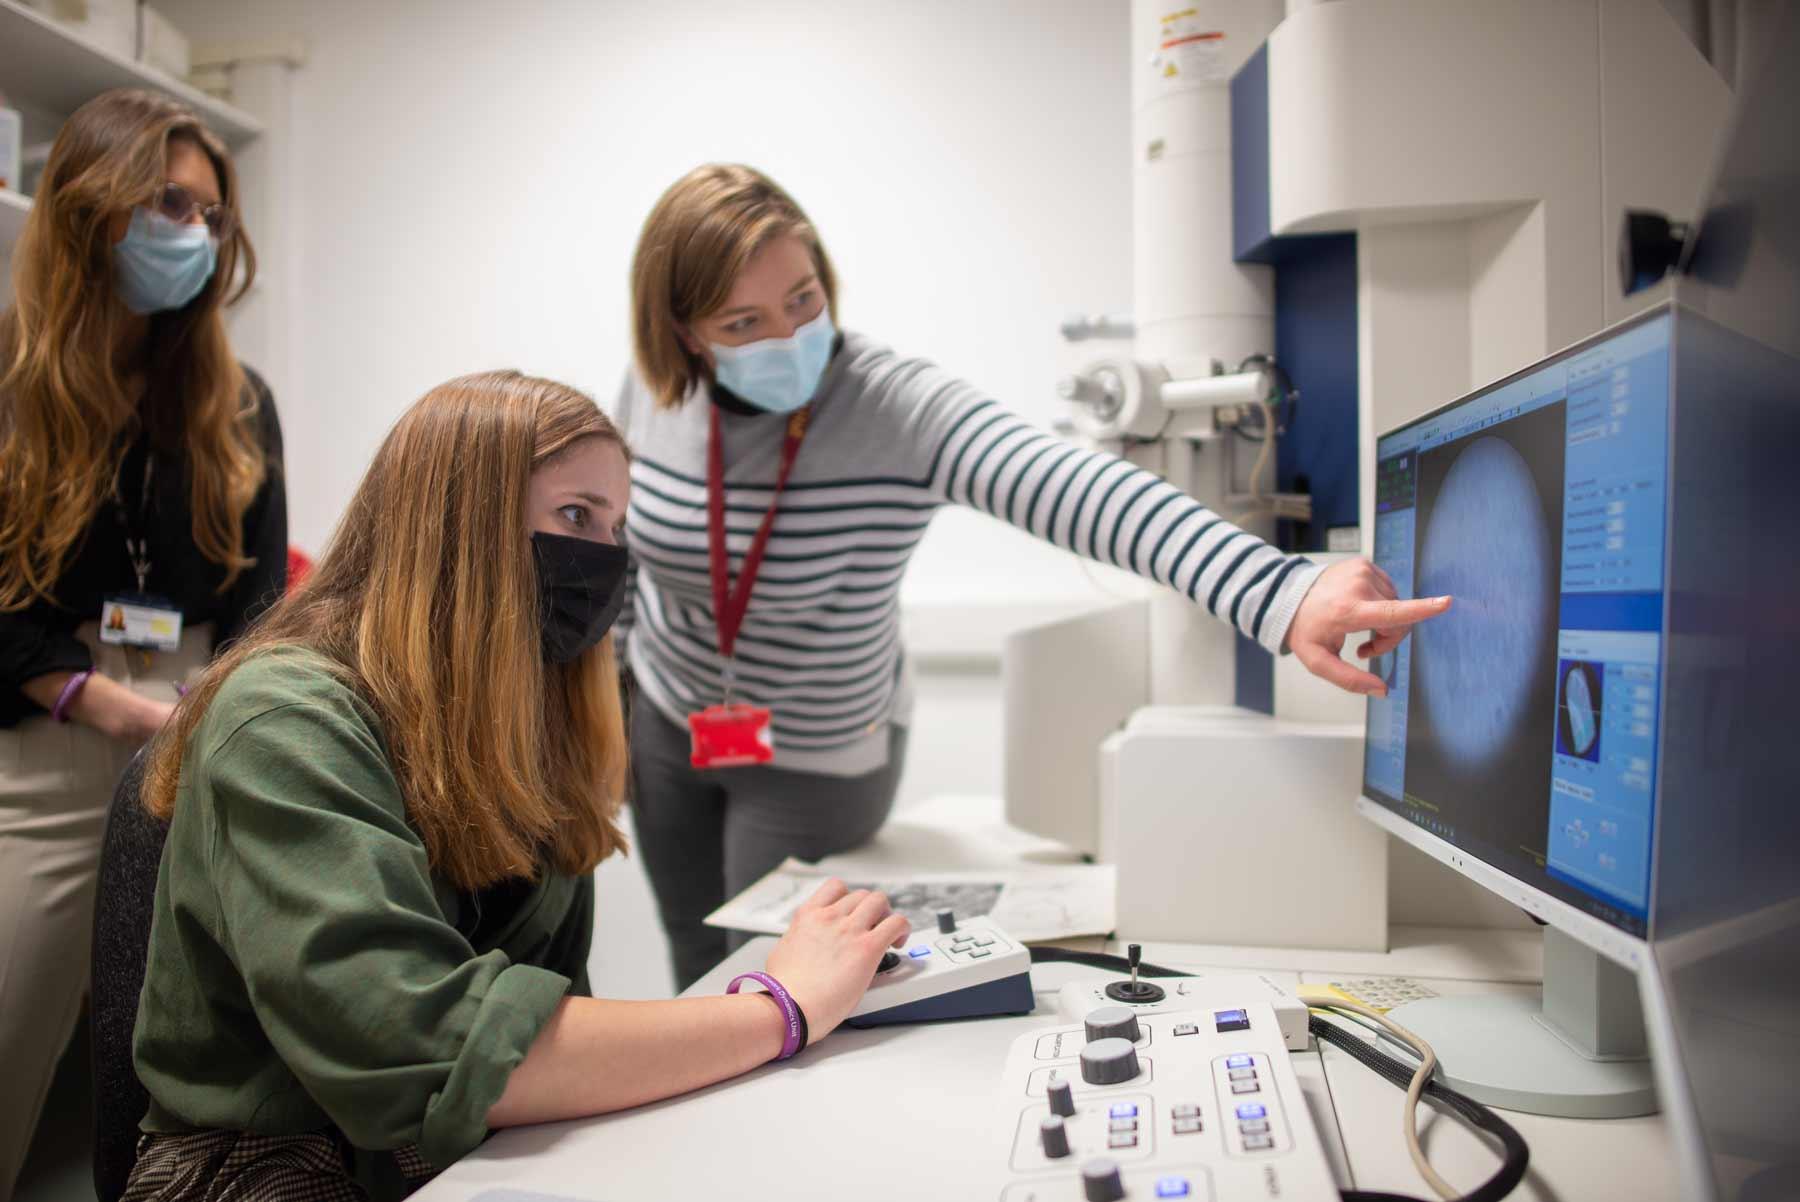 Dr. Natalie Doig points out features in the live camera feed from the transmission electron microscope as a school pupil navigates a specimen.